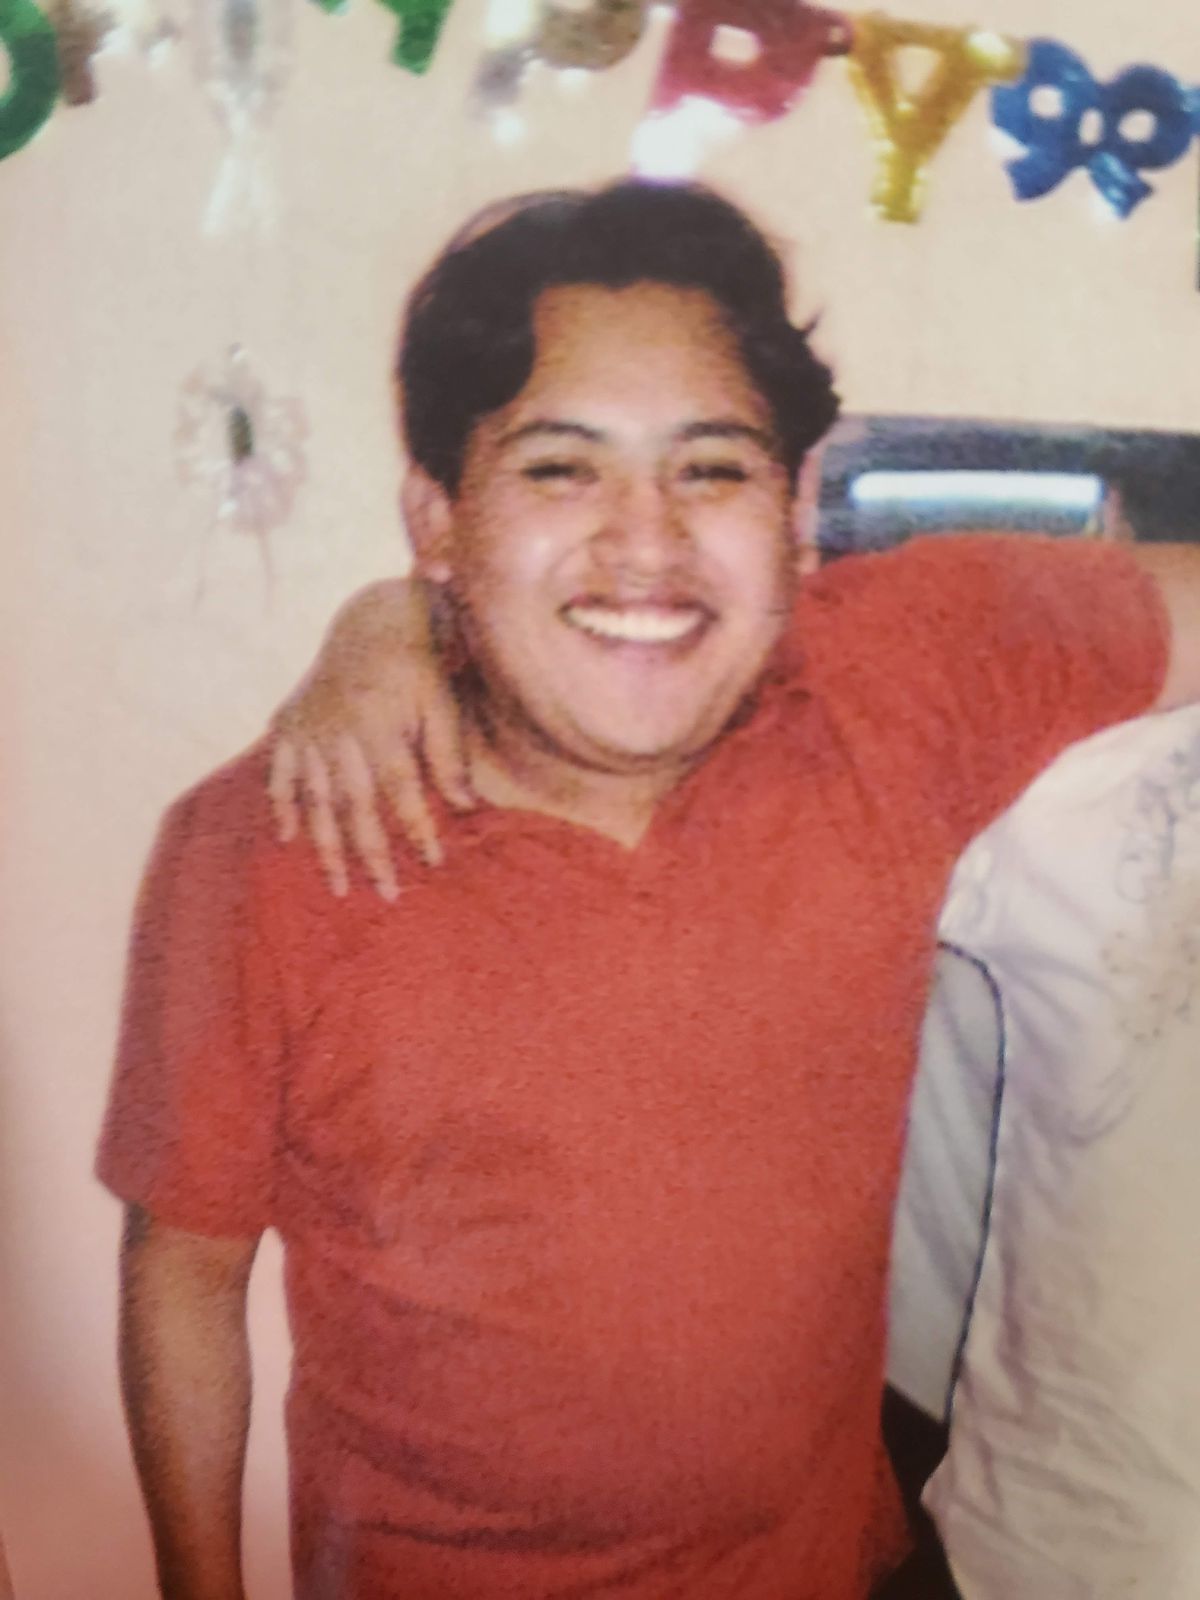 Victor Morales smiling and wearing a red shirt